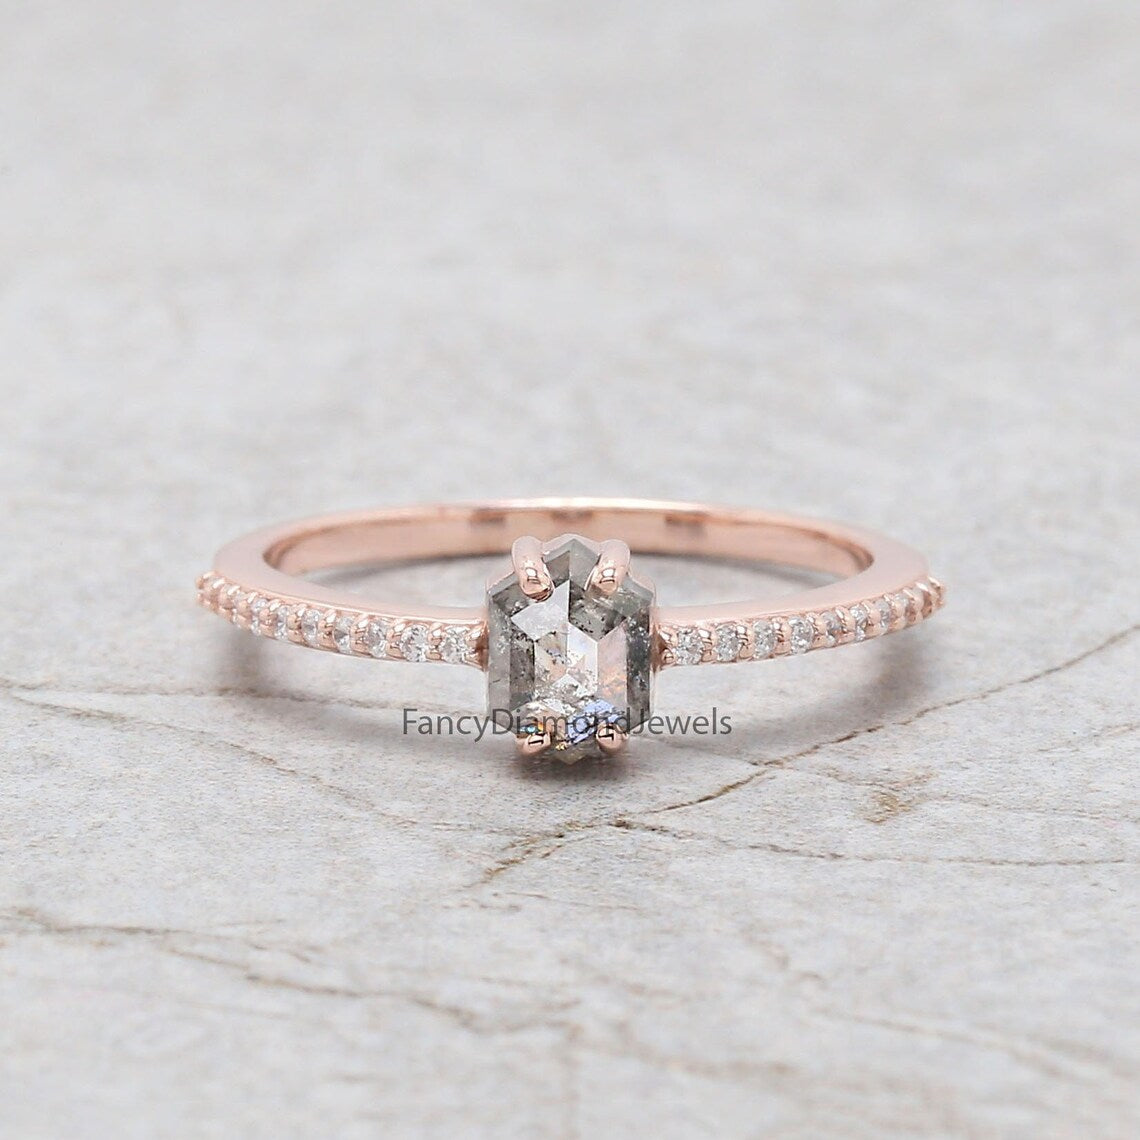 Hexagon Cut Salt And Pepper Diamond Ring 0.72 Ct 6.00 MM Hexagon Diamond Ring 14K Solid Rose Gold Silver Engagement Ring Gift For Her QN729